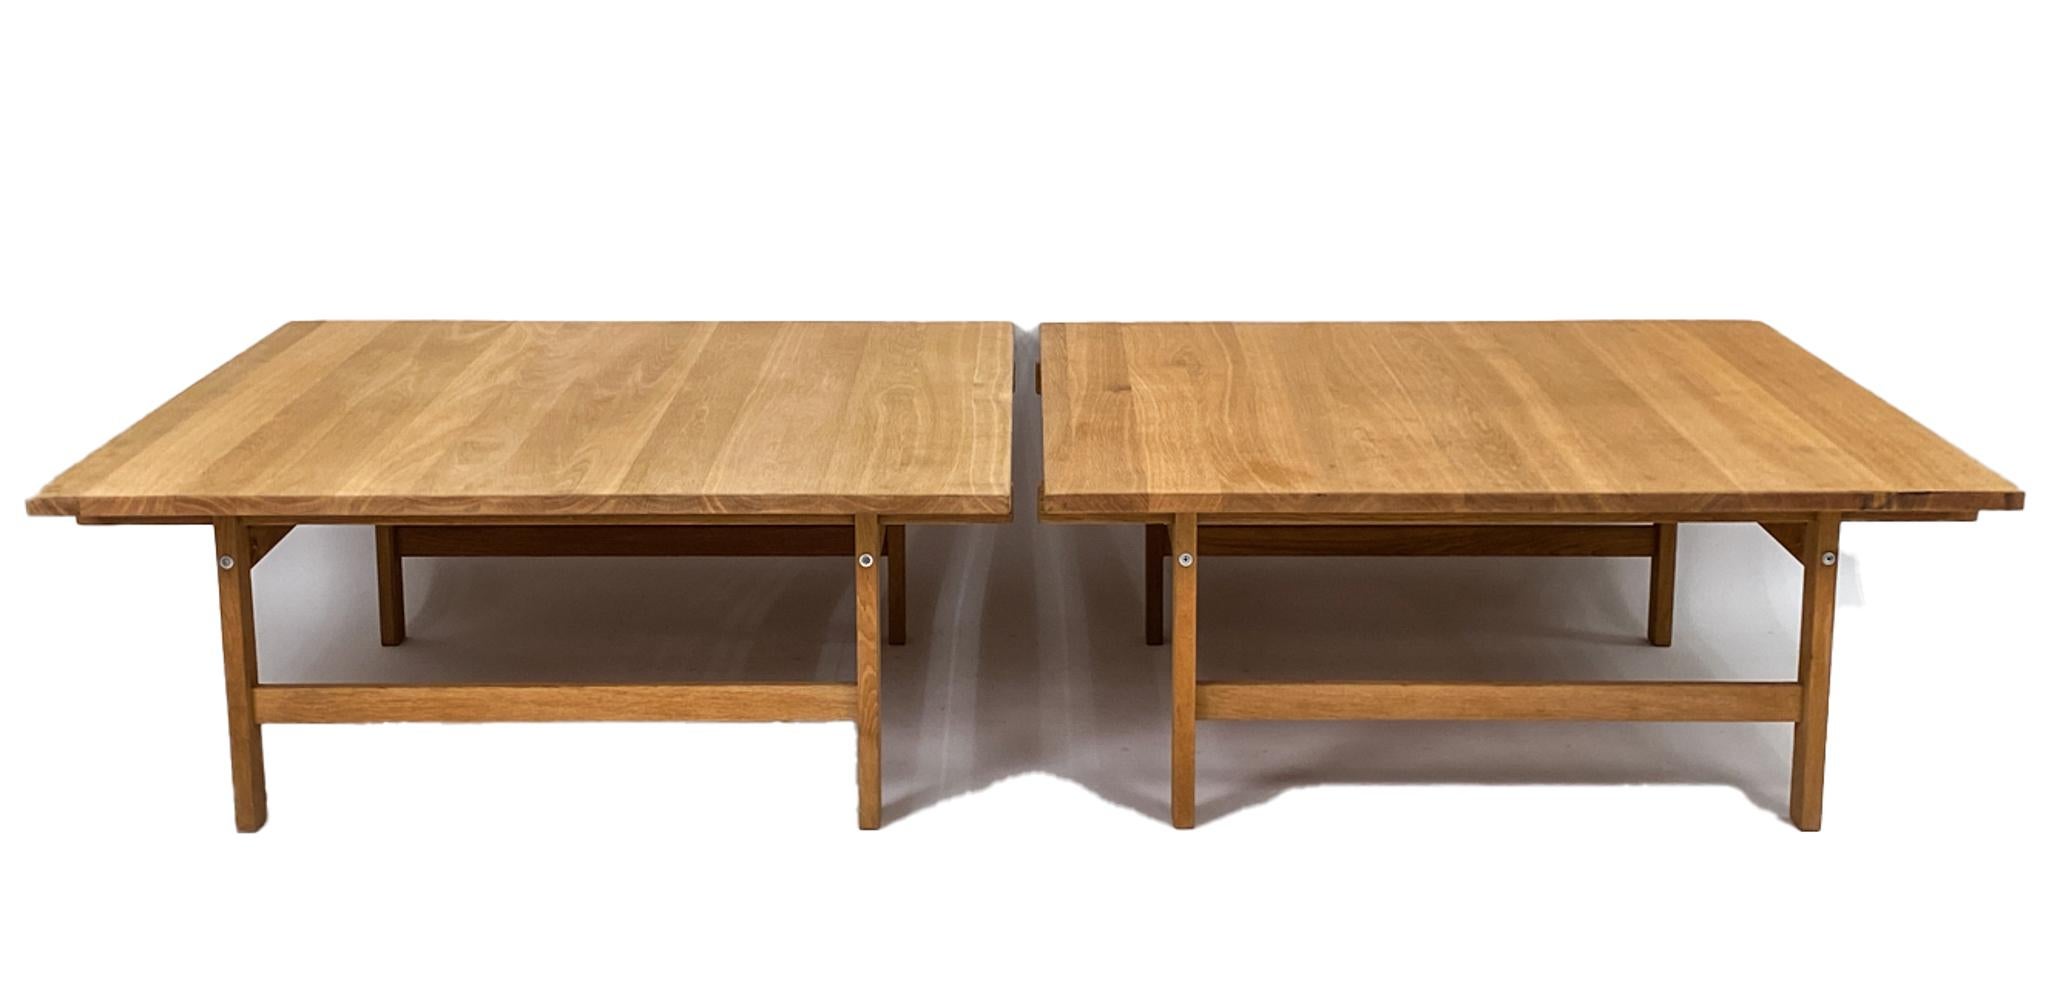 One of the figures at the forefront of Scandinavian modern design, Hans J. Wegner has become a ubiquitous household name for his iconic mid-century furniture. This pair of larger-scale coffee tables is no exception, sporting quality craftsmanship